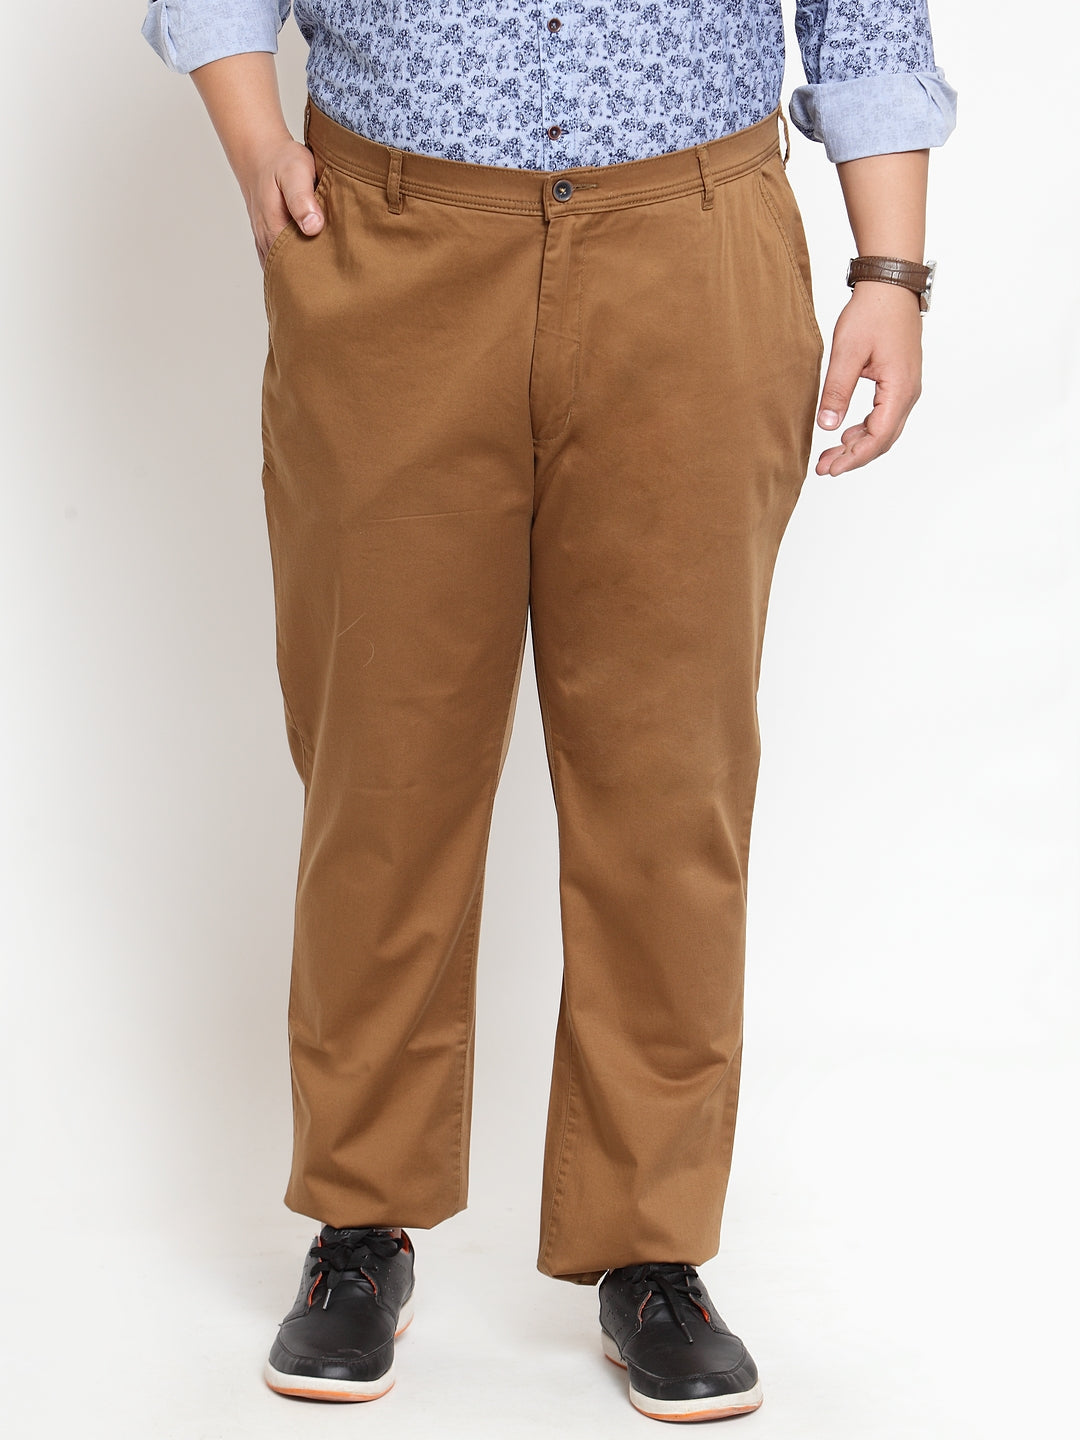 Curvature Formal Wear Regular Fit Cotton Mens Trousers Made In India Waist  Size: 28 To 38 at Best Price in Kolkata | Kaaparsik International